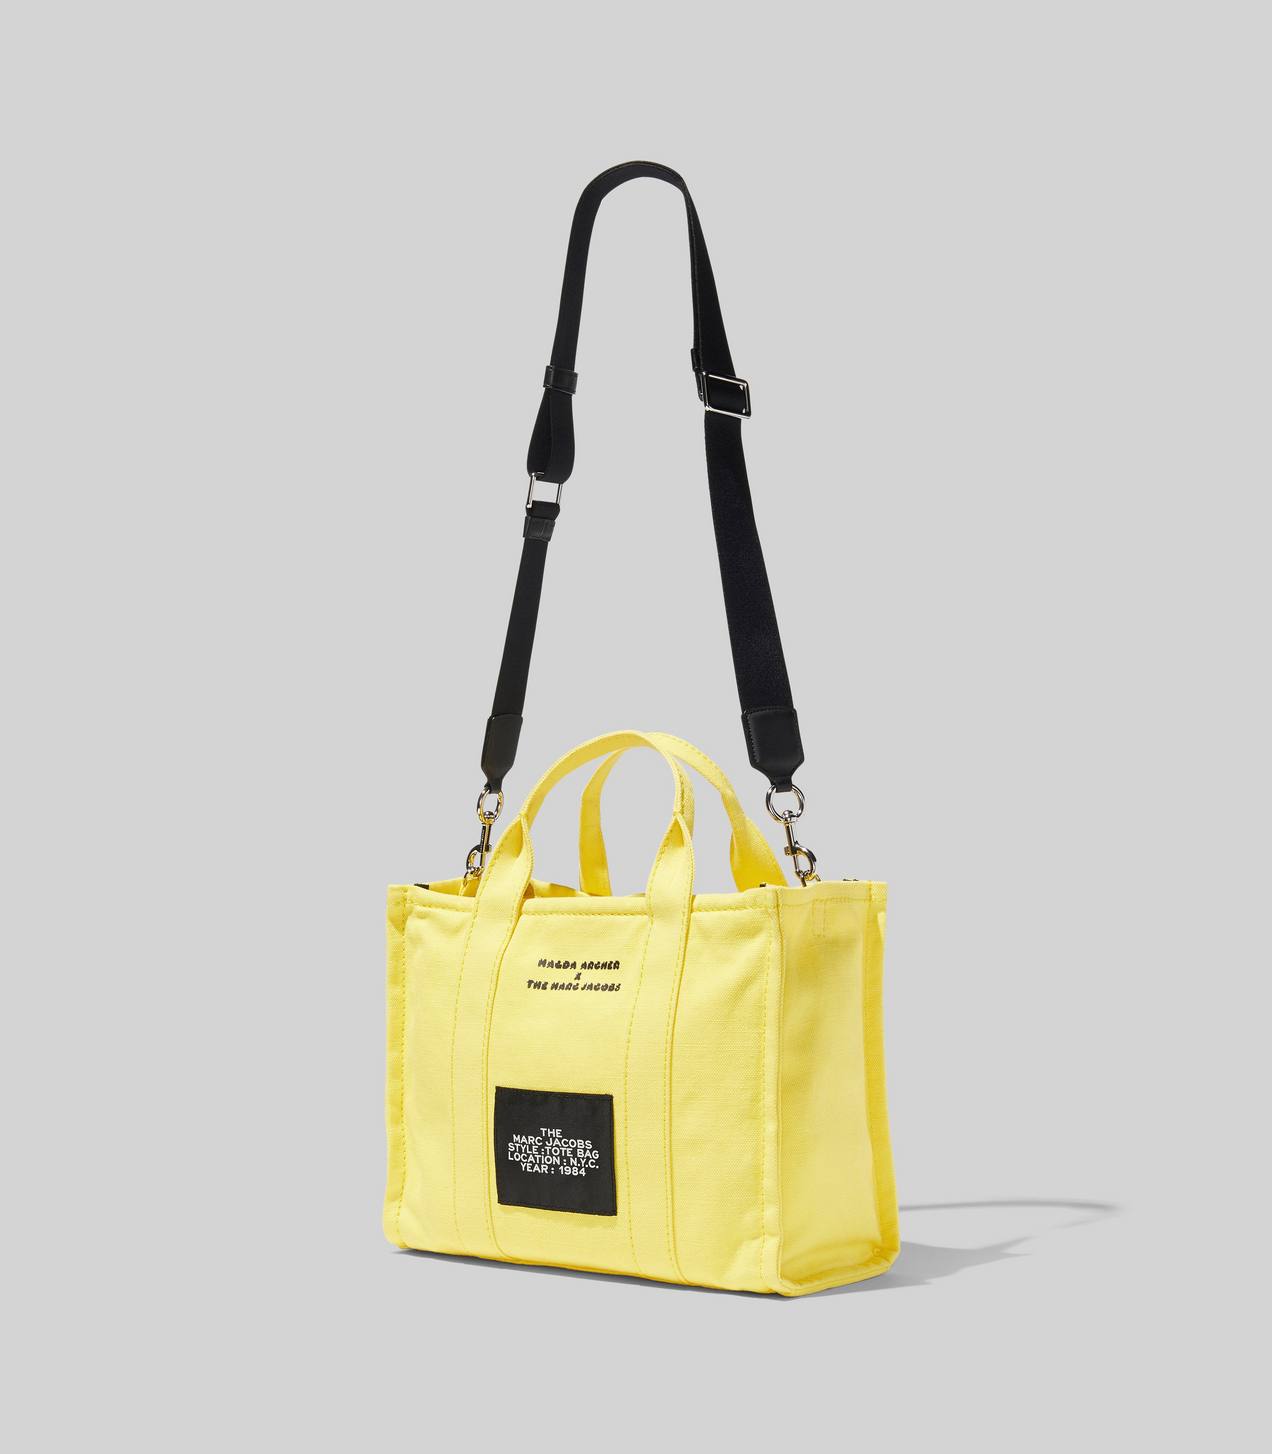 Magda Archer x The Small Traveler Tote Marc Jacobs